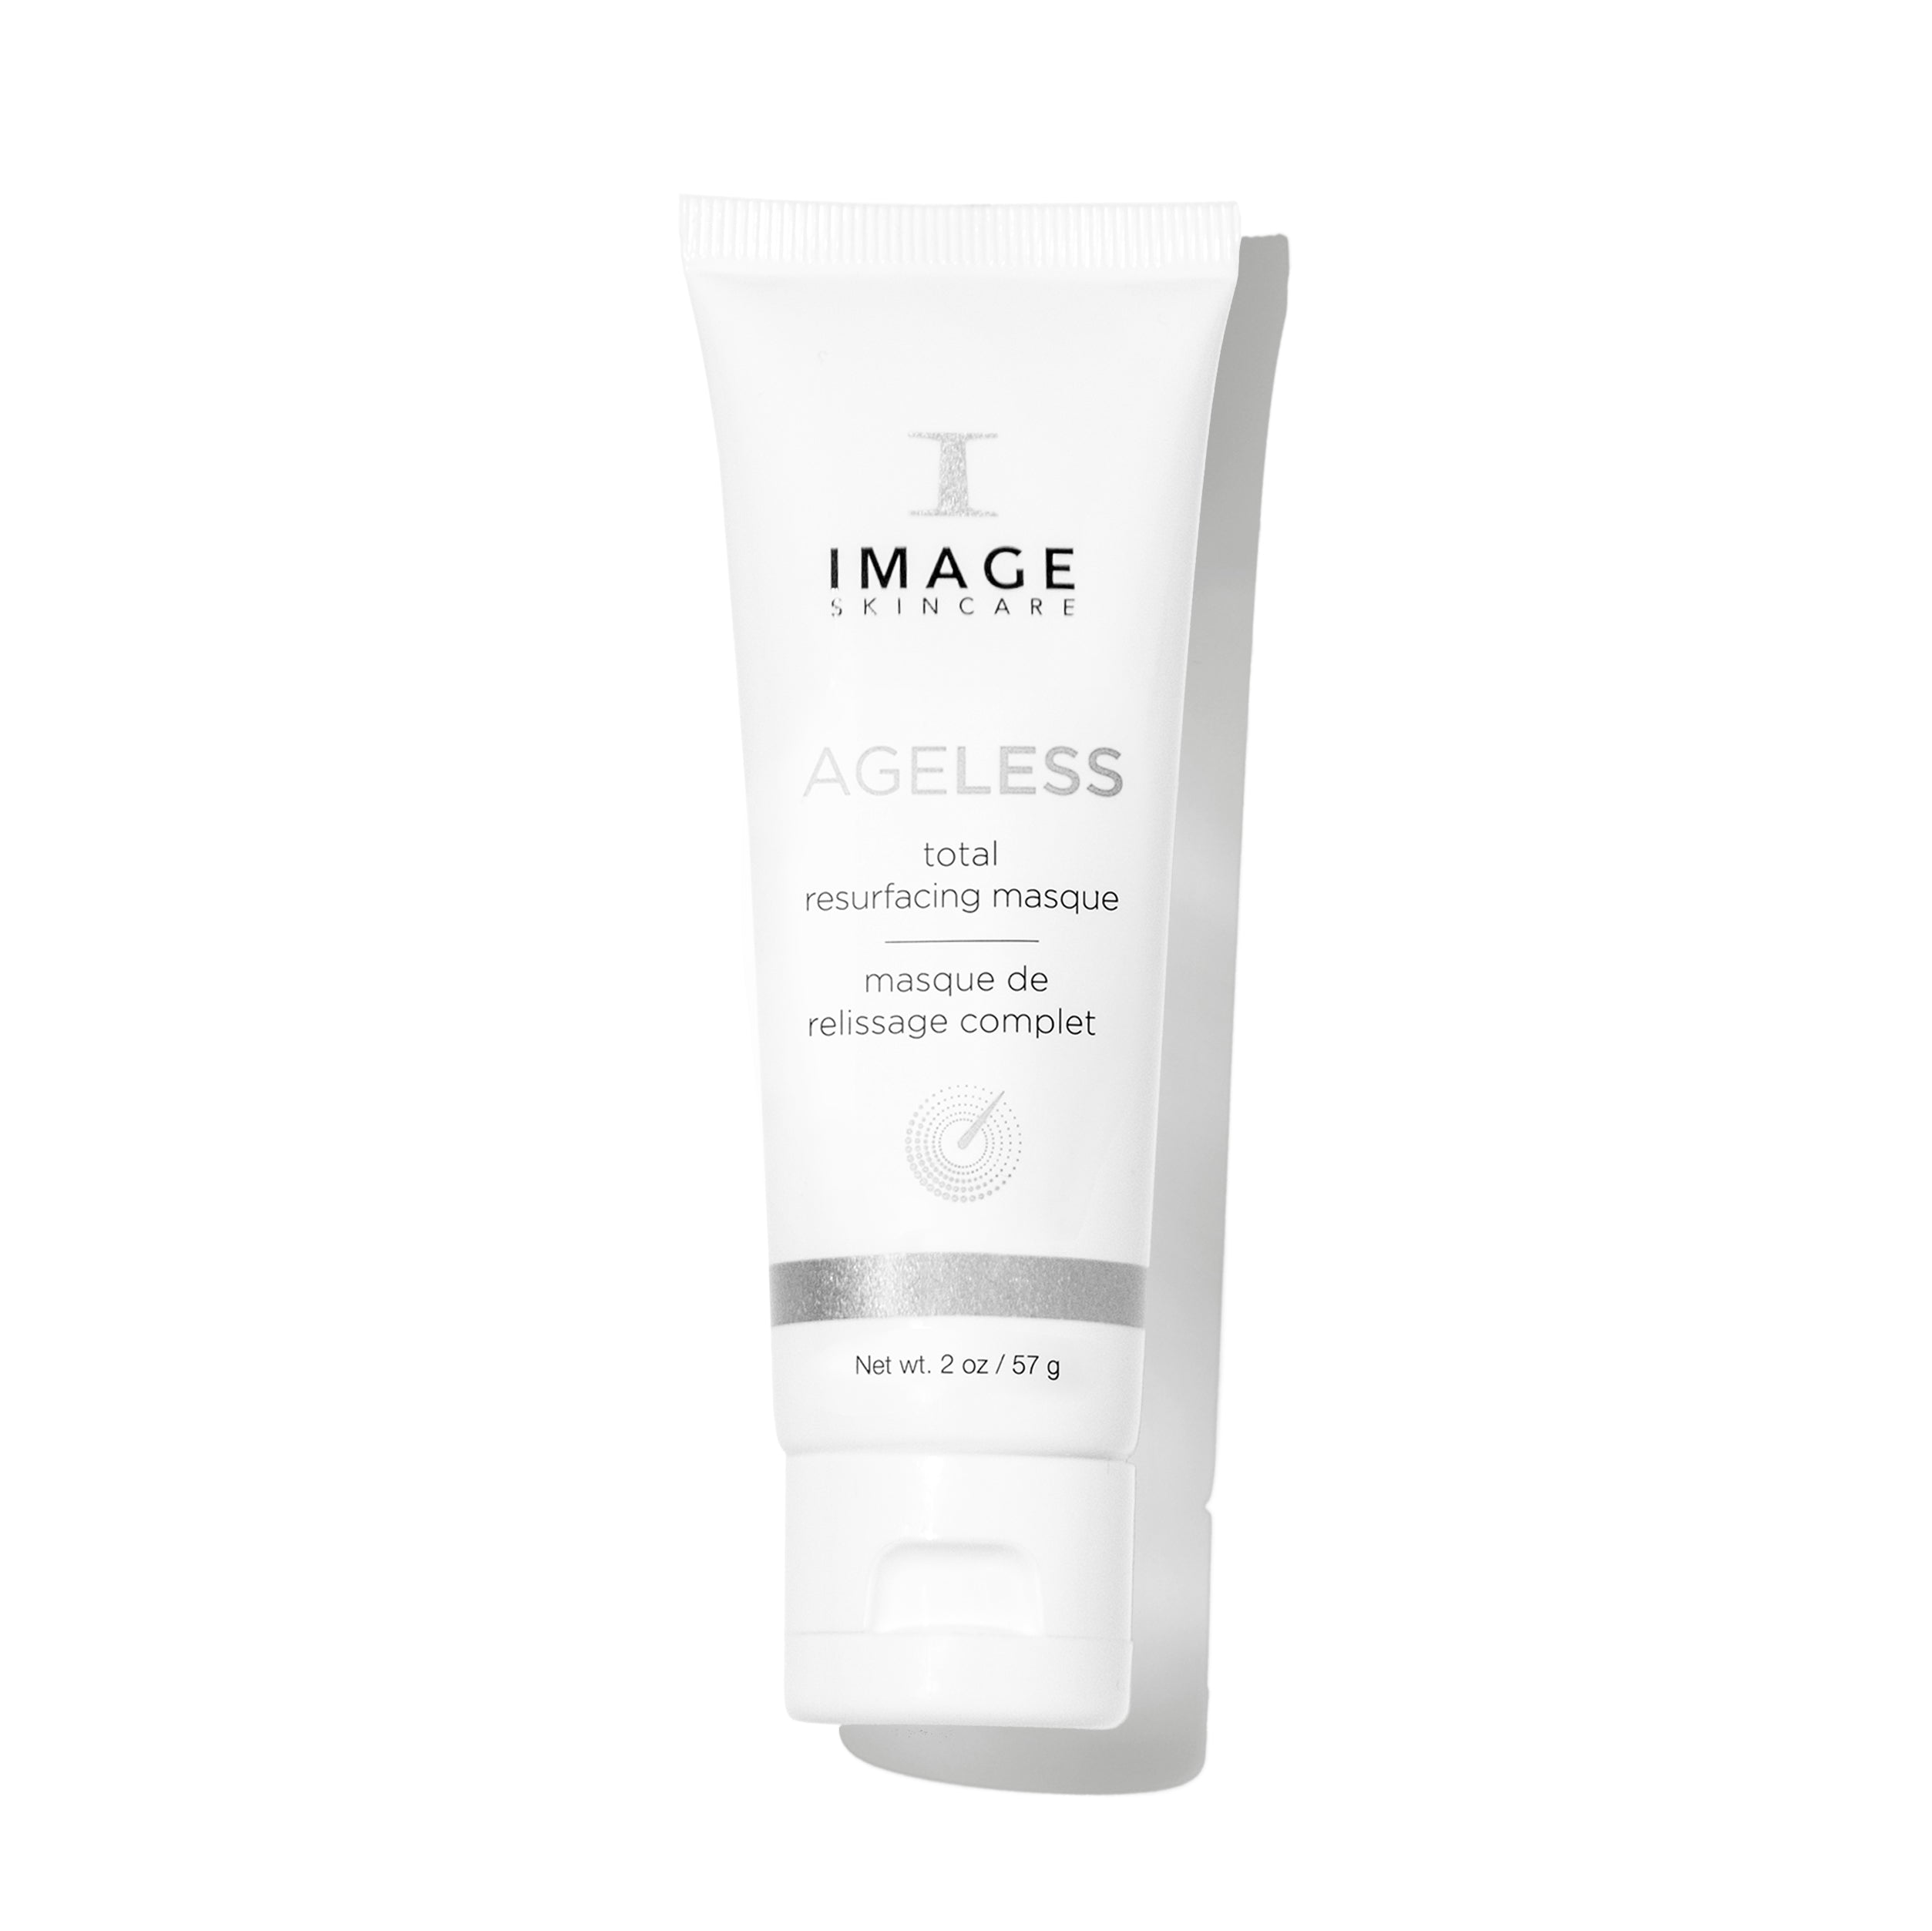 Image Skincare Ageless Total Resurfacing Mask Shop At Exclusive Beauty